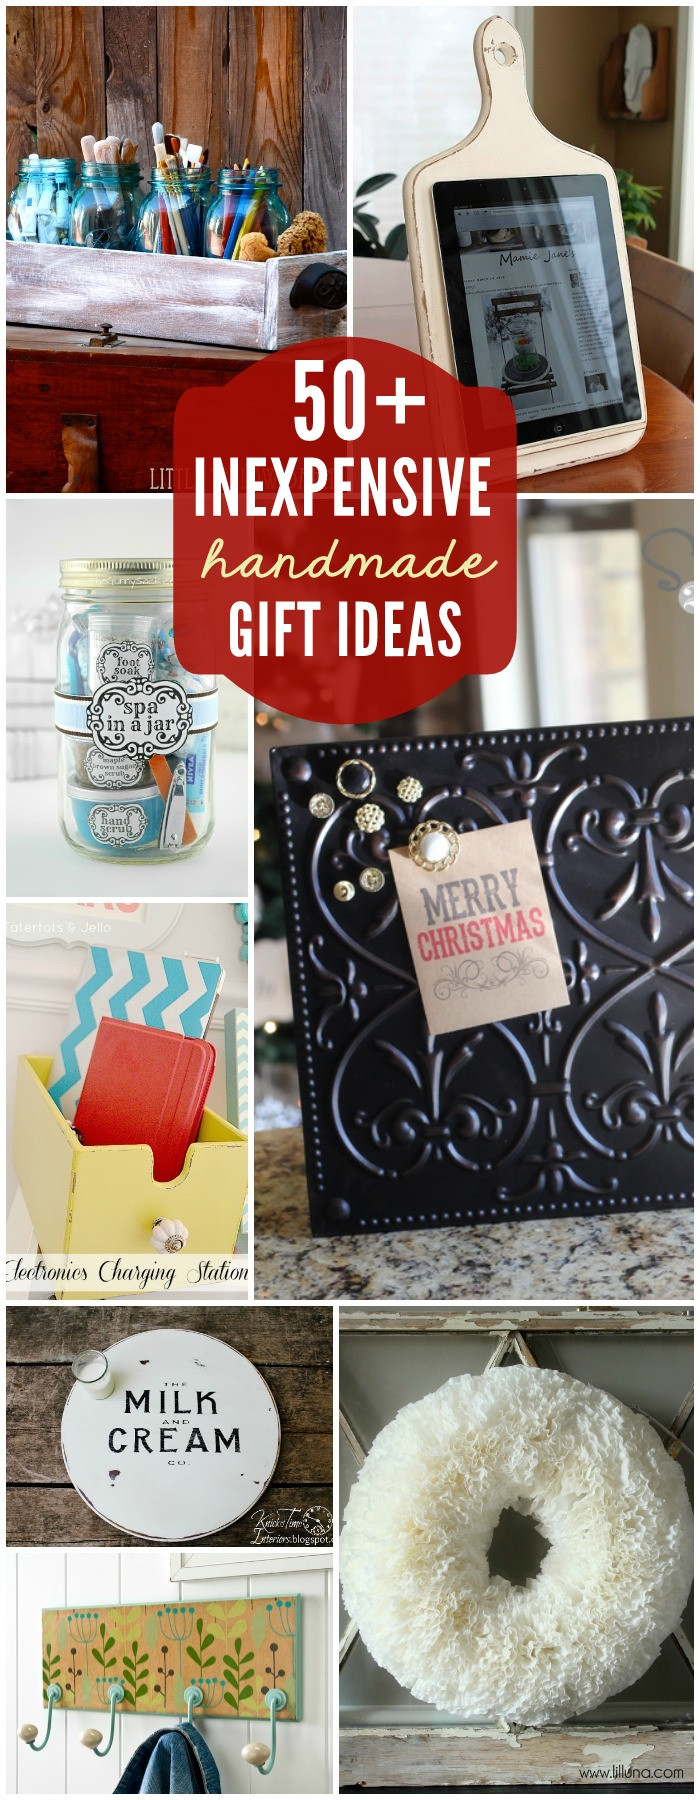 Cool Holiday Gift Ideas
 Easy DIY Gift Ideas